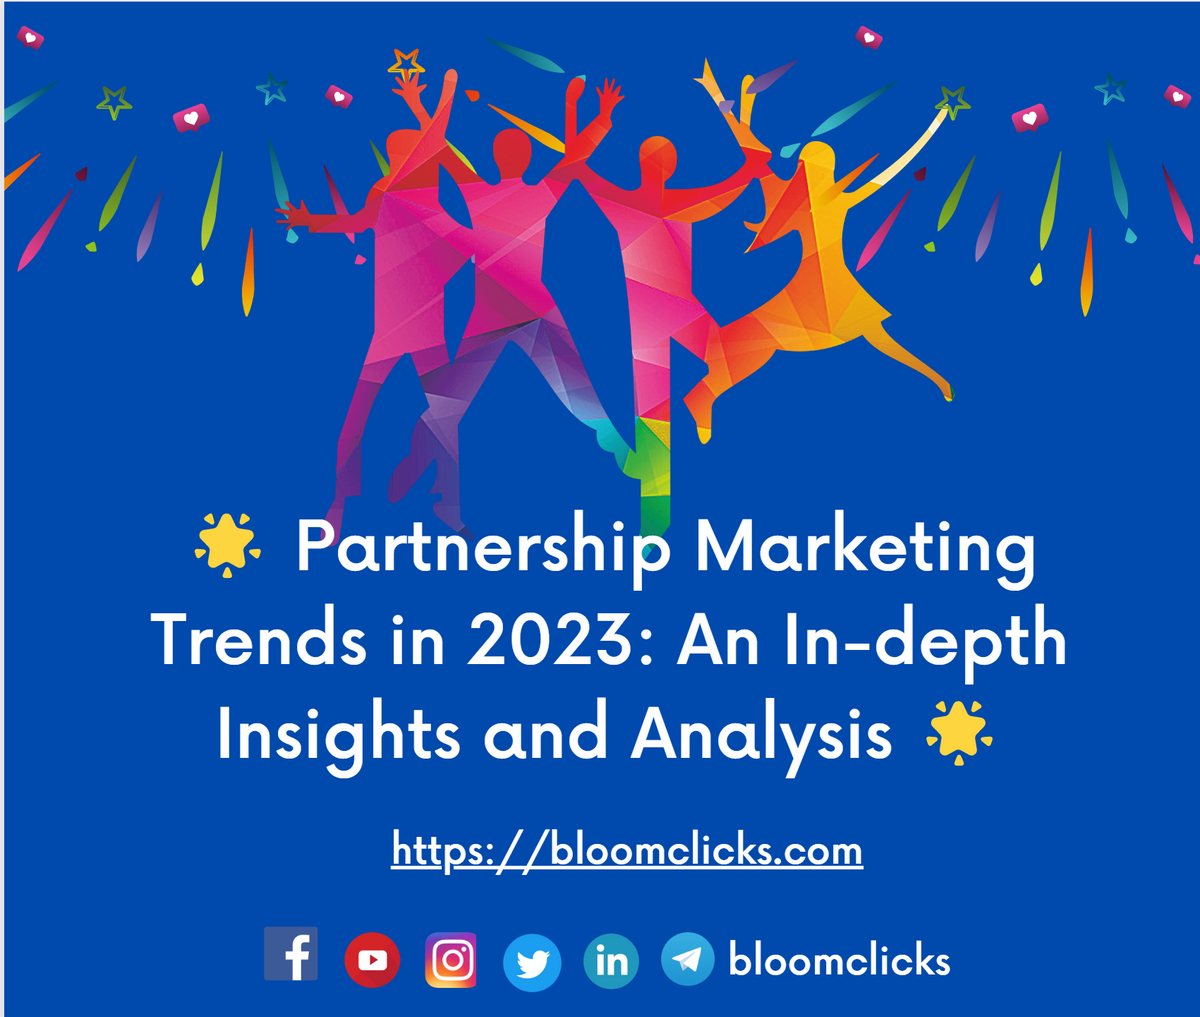 Partnership Marketing Trends in 2023: An In-depth Insights and Analysis